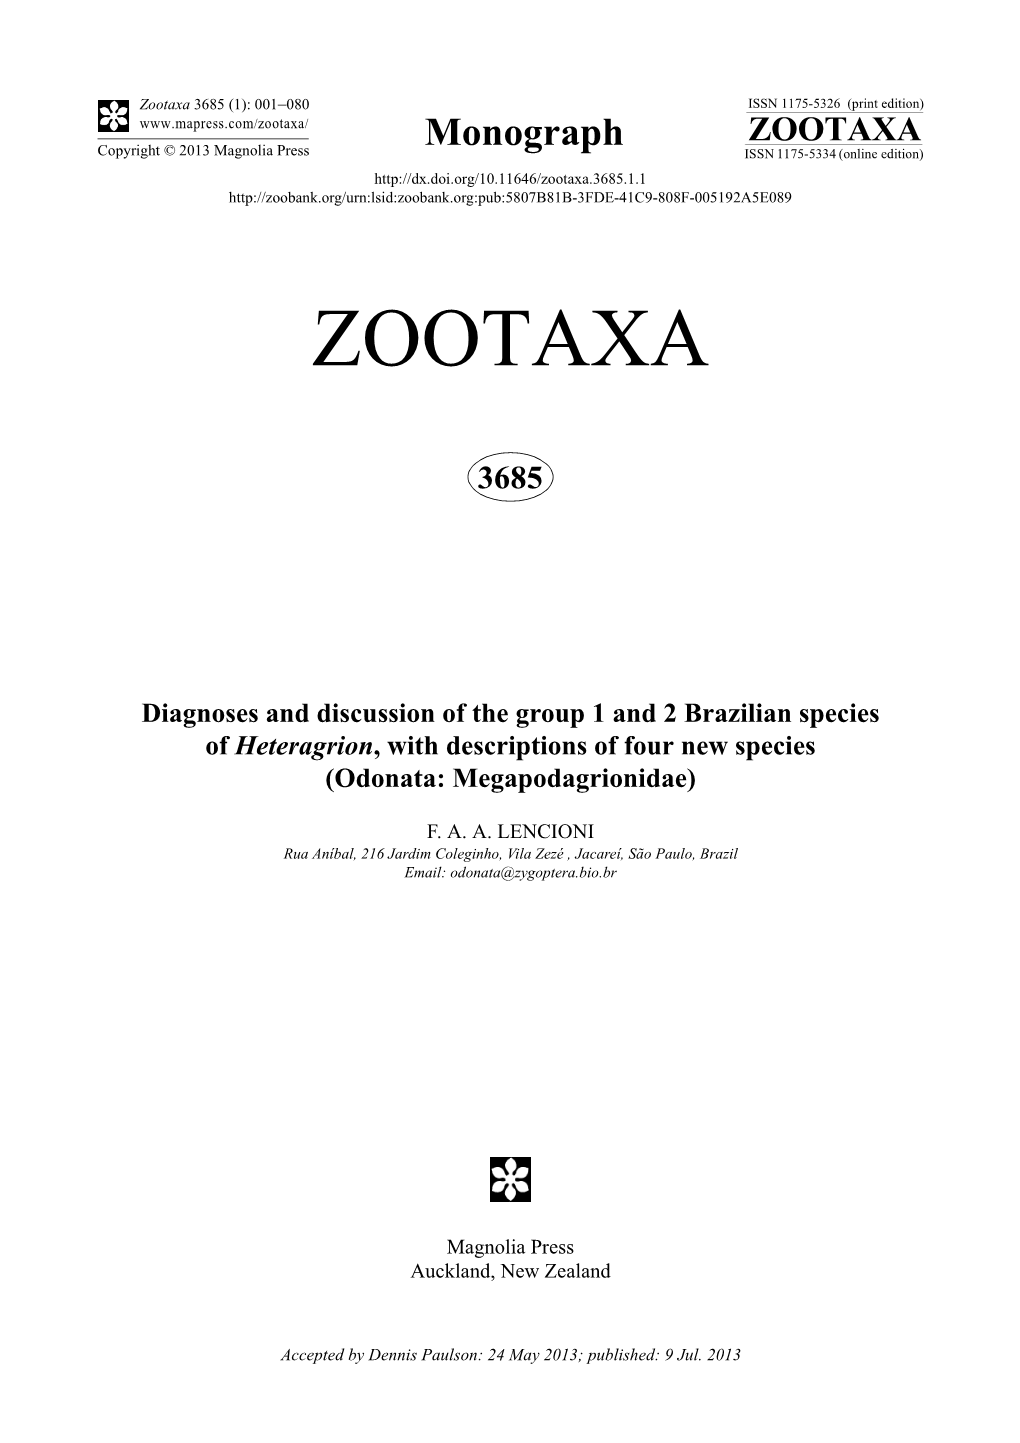 Diagnoses and Discussion of the Group 1 and 2 Brazilian Species of Heteragrion, with Descriptions of Four New Species (Odonata: Megapodagrionidae)